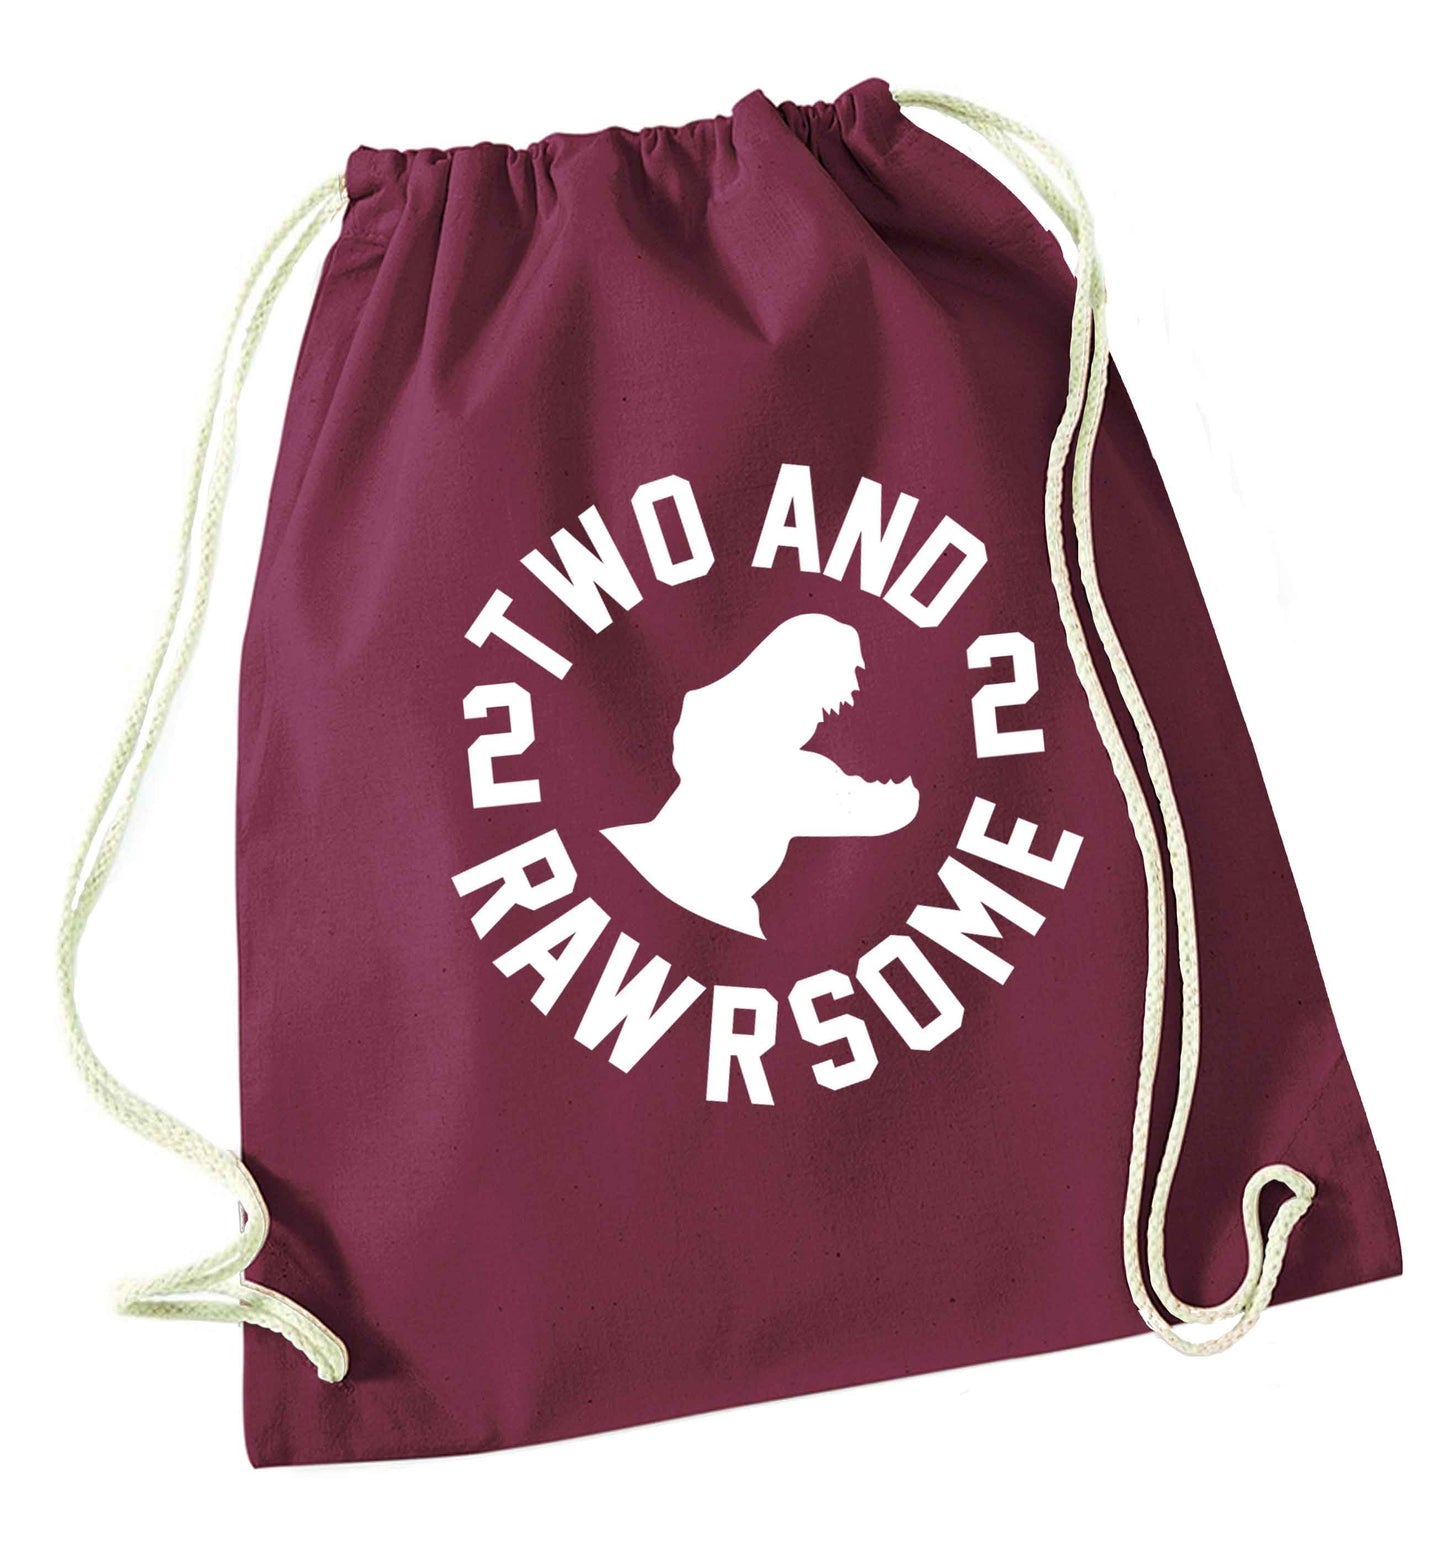 Two and rawrsome maroon drawstring bag